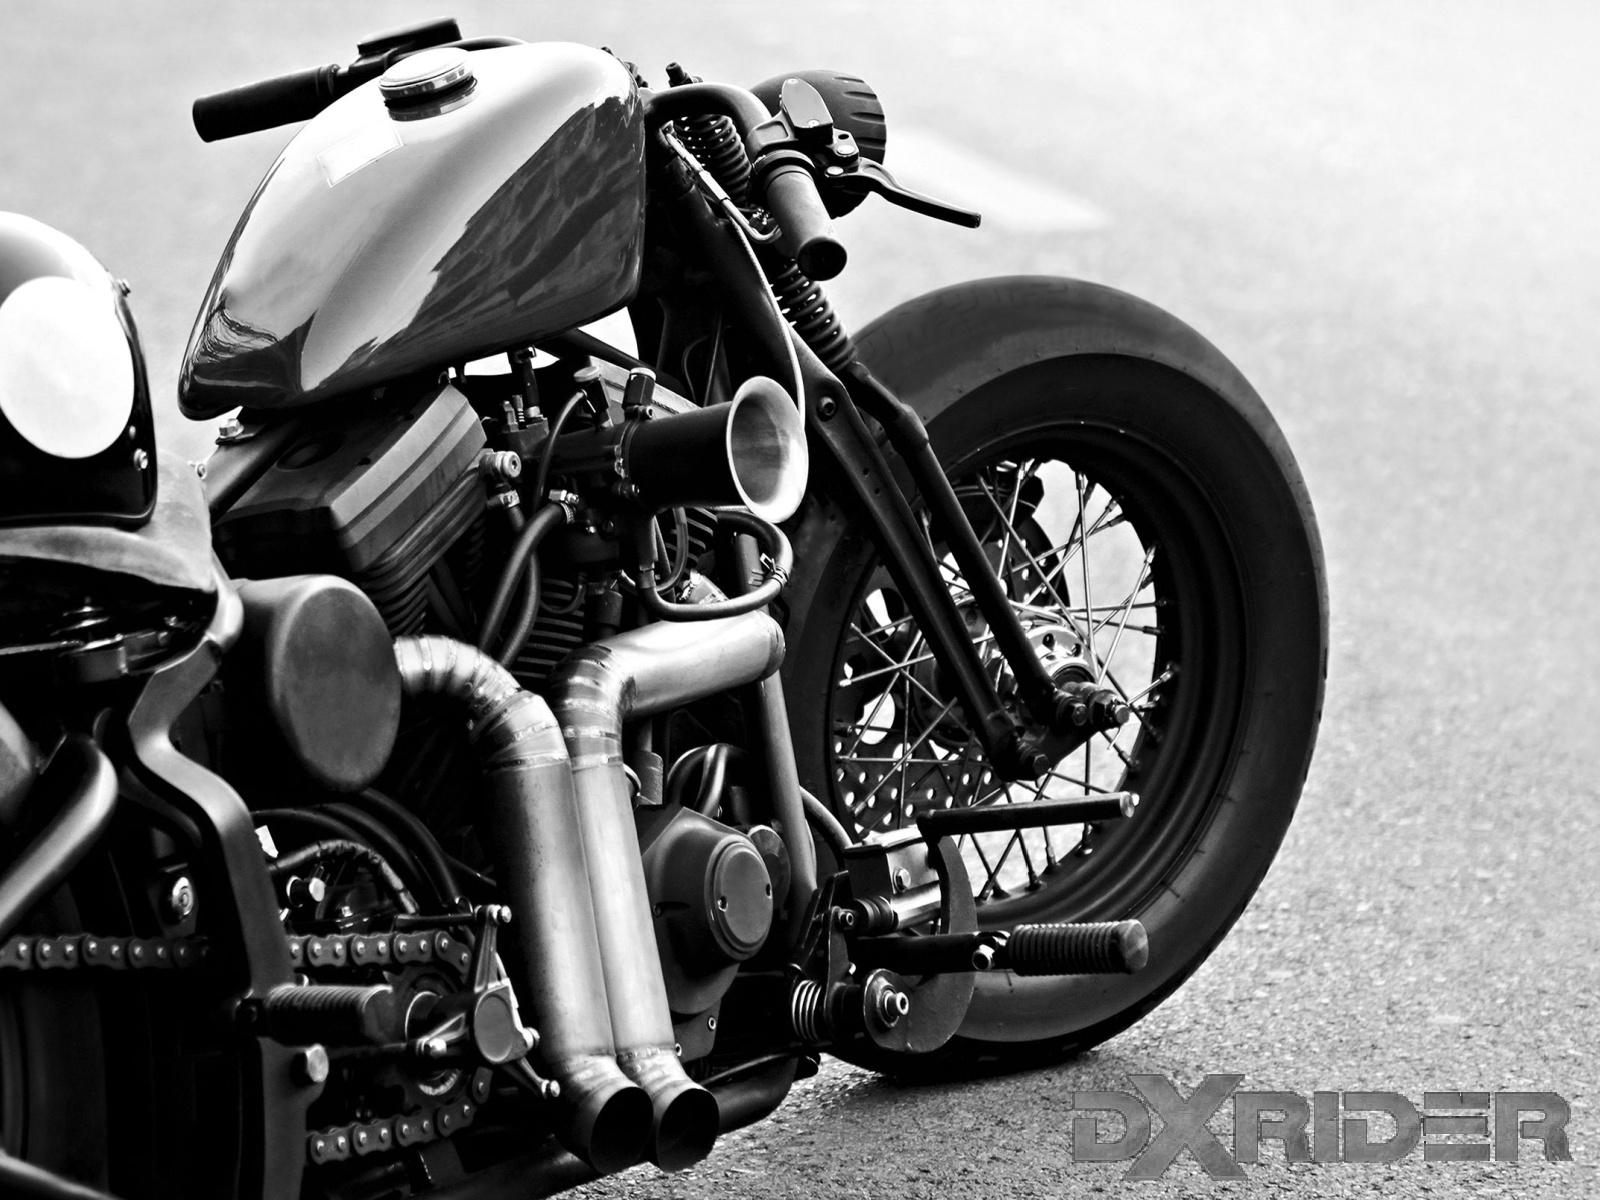 Unleash Your Riding Dreams and Treat Yourself to a Custom Bike with DXRIDER